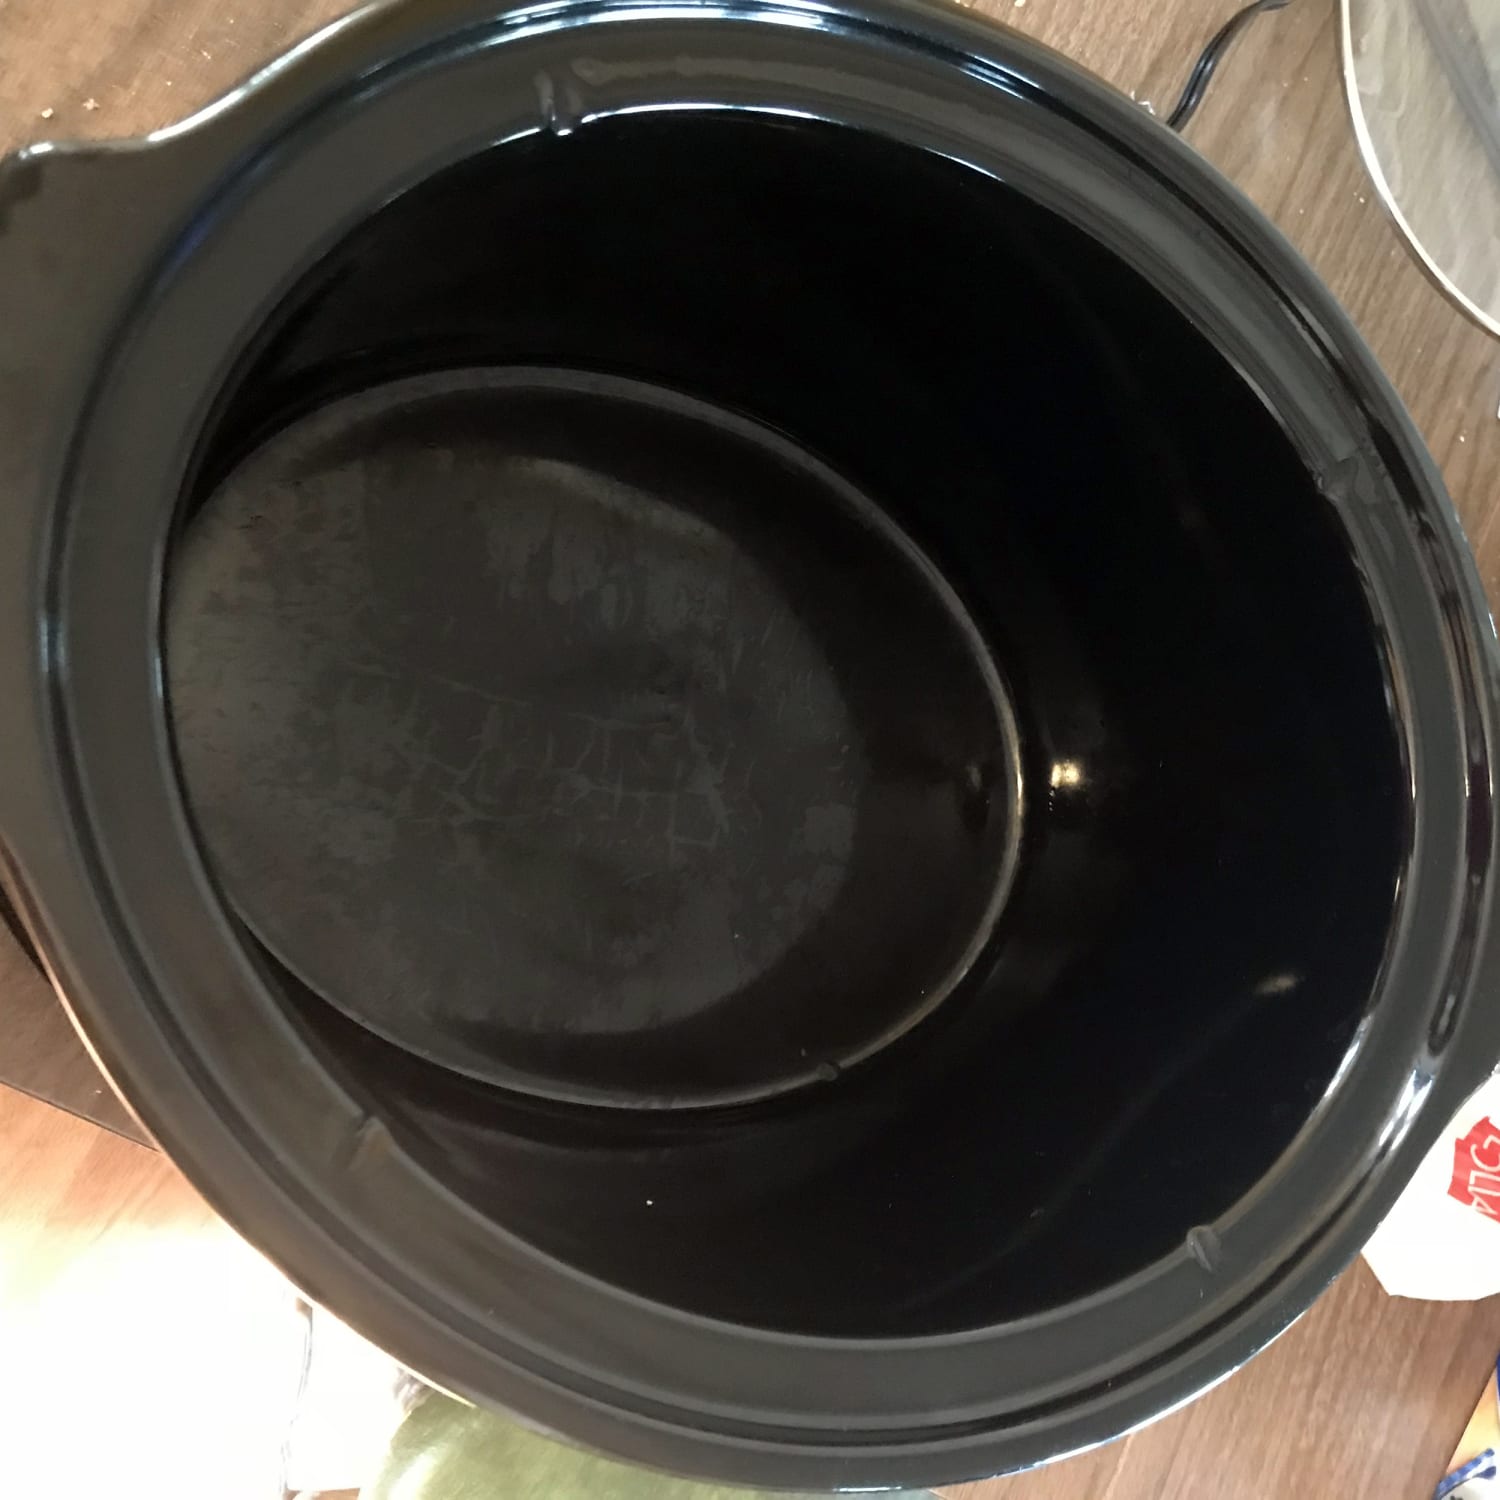 These $3 Slow Cooker Liners From  Make Cleanup So Fast & Easy –  StyleCaster